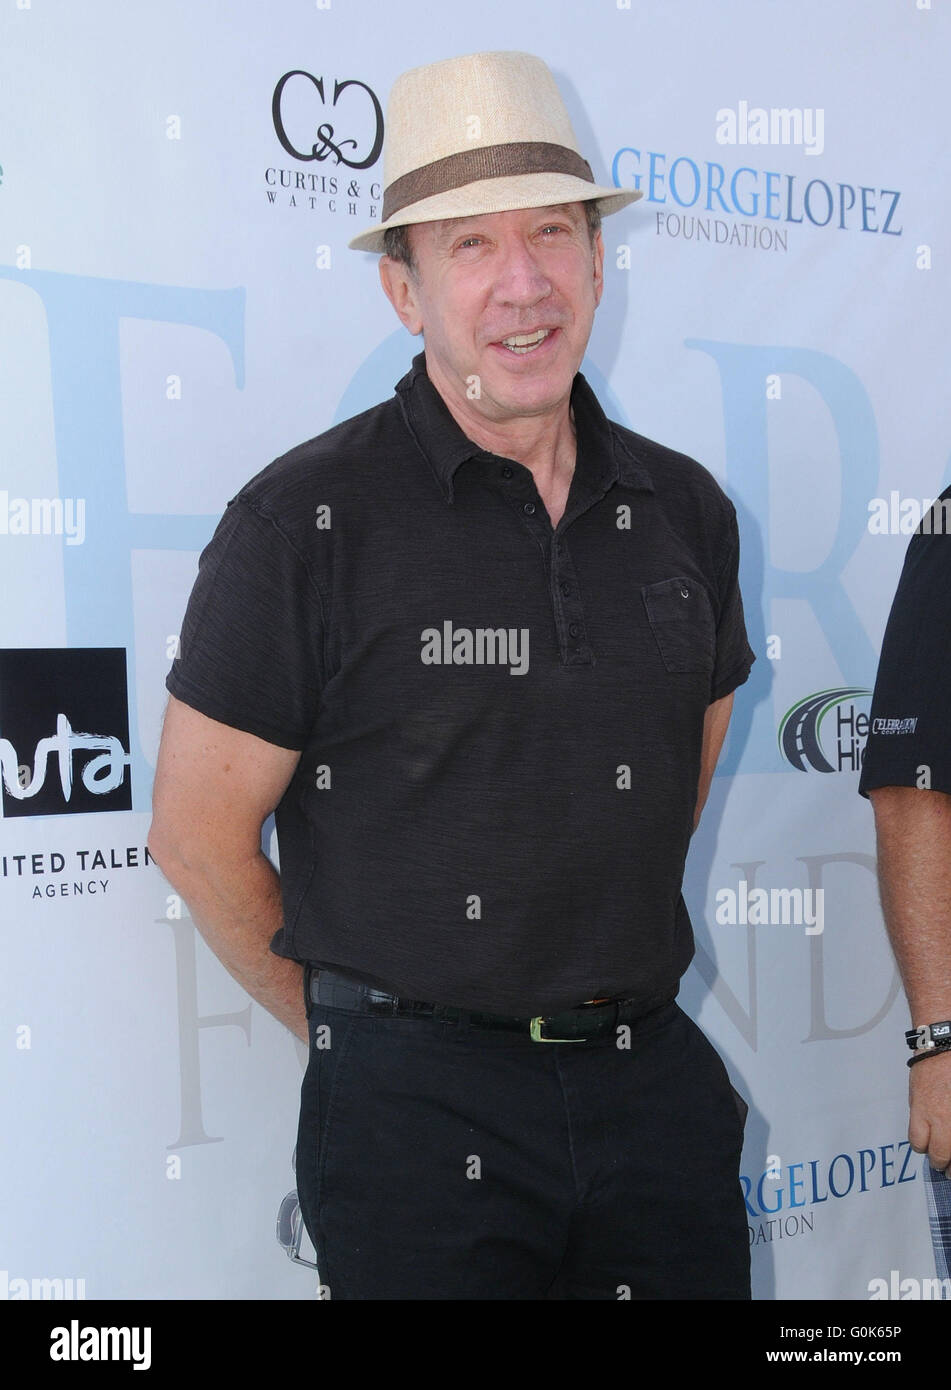 Burbank, CA, USA. 21st Feb, 2016. 02 May 2016 - Burbank, California - Tim Allen. Arrivals for the 9th Annual George Lopez Celebrity Golf Classic to benefit the George Lopez Foundation held at the Lakeside Golf Club. Photo Credit: Birdie Thompson/AdMedia © Birdie Thompson/AdMedia/ZUMA Wire/Alamy Live News Stock Photo